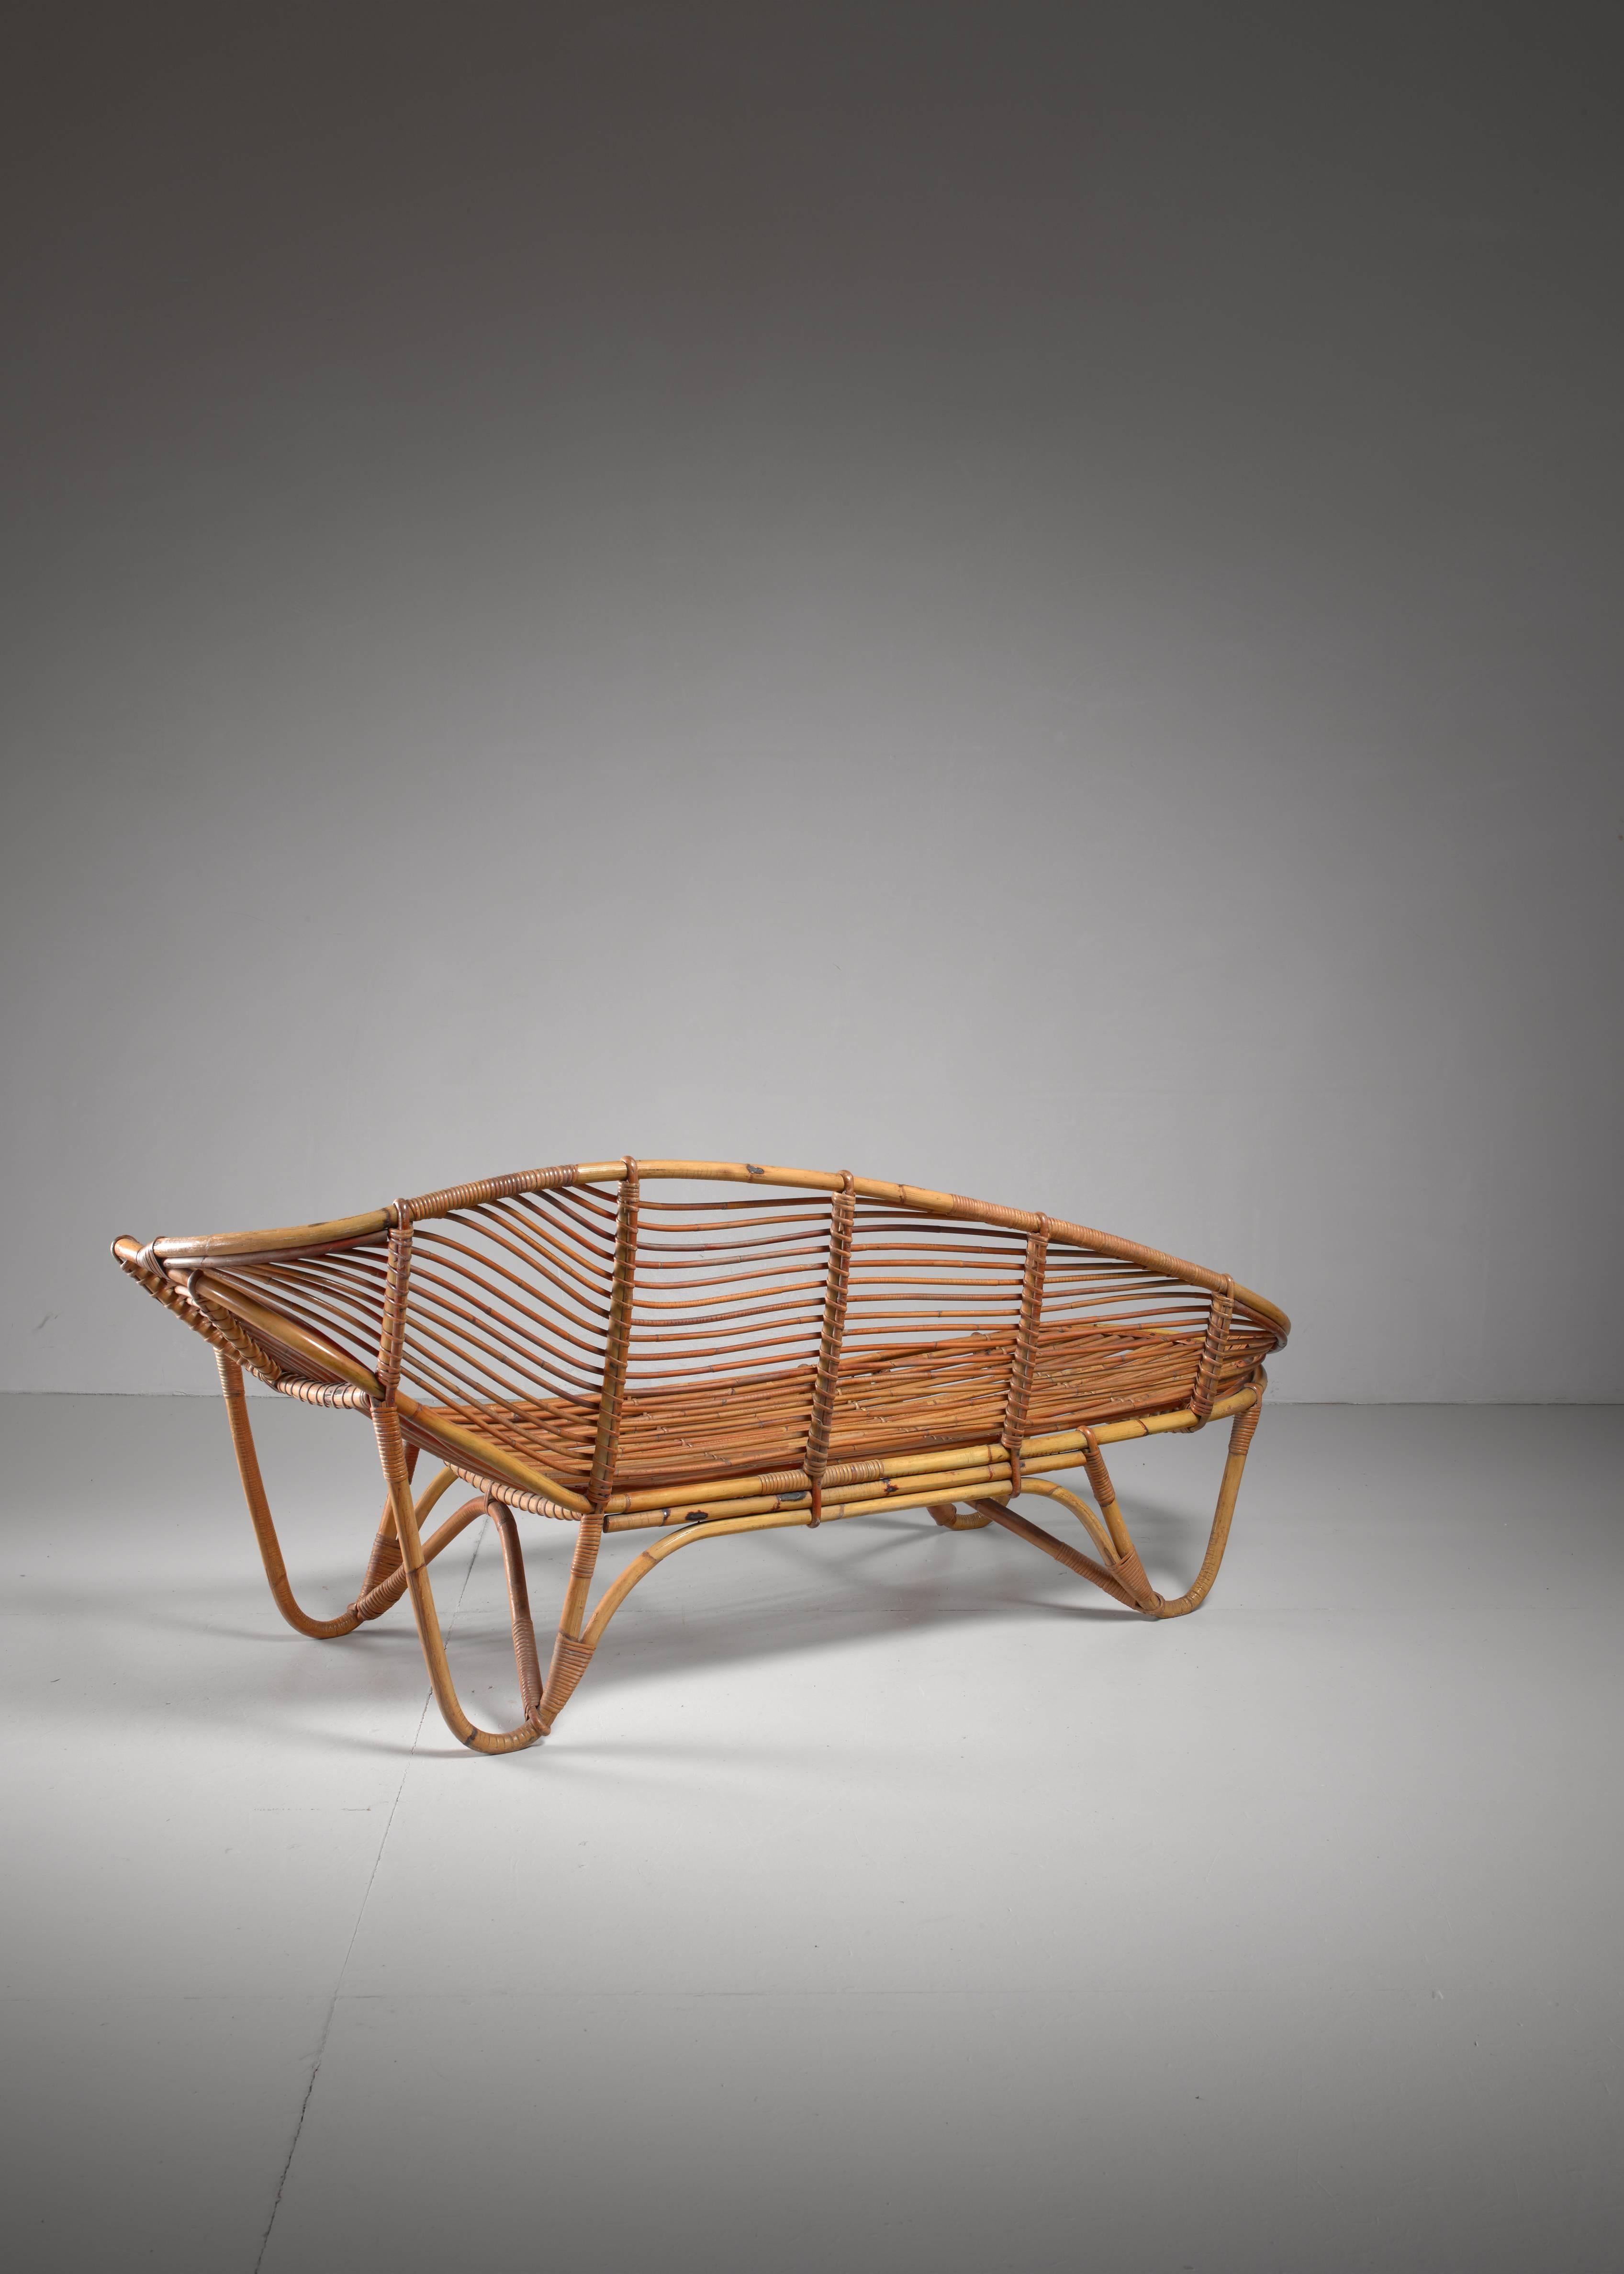 Mid-20th Century Swedish Bamboo and Rattan Chaise Longue, 1940s For Sale